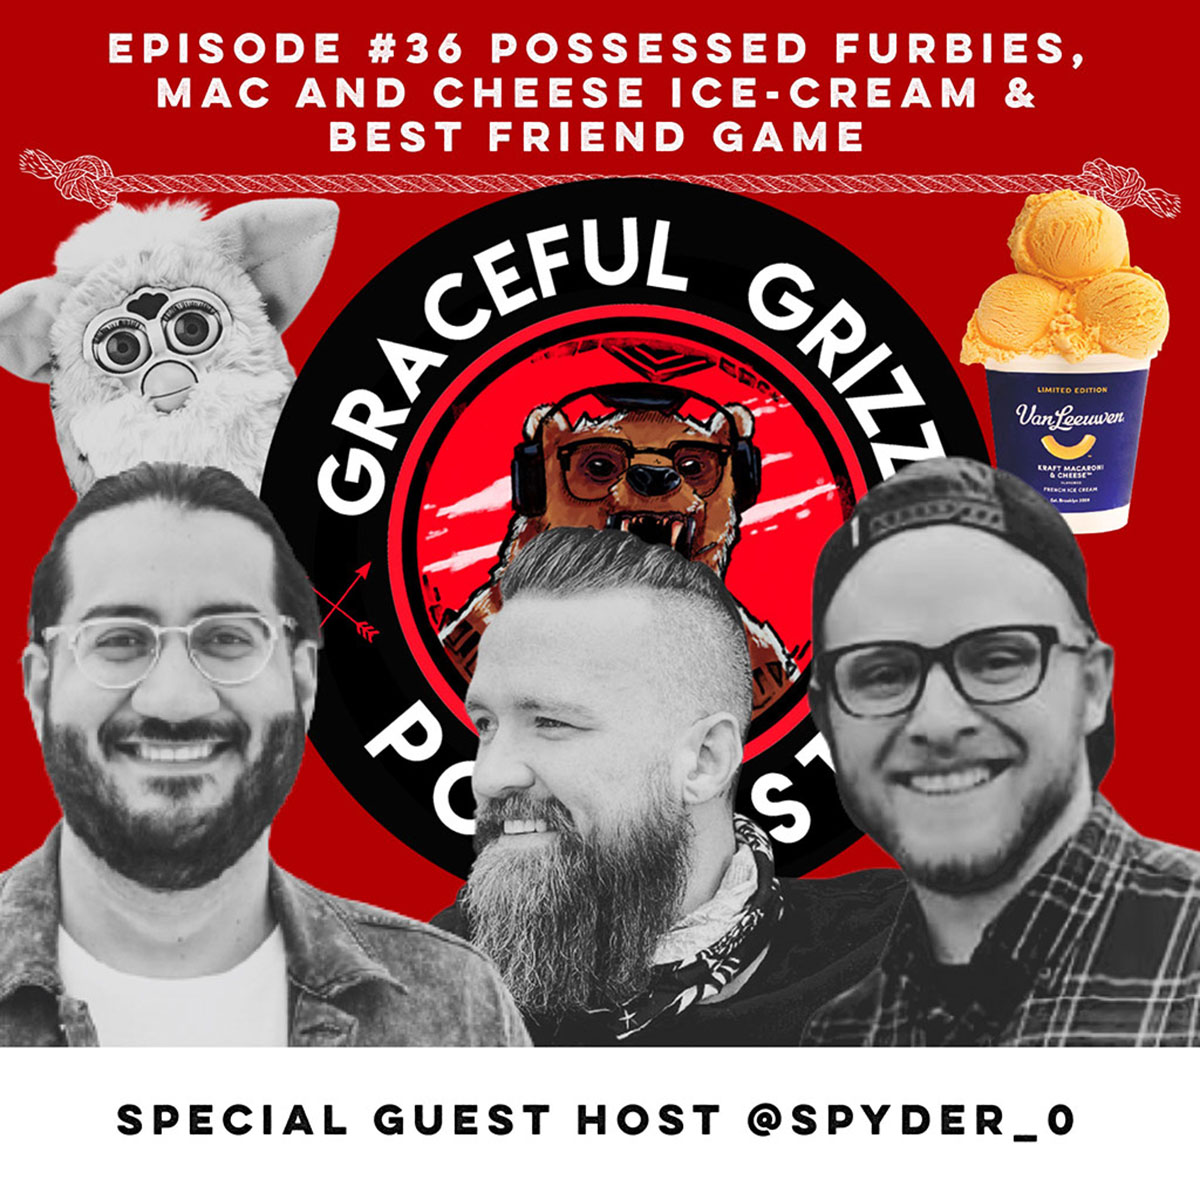 Episode 36 - Graceful Grizzly Podcast